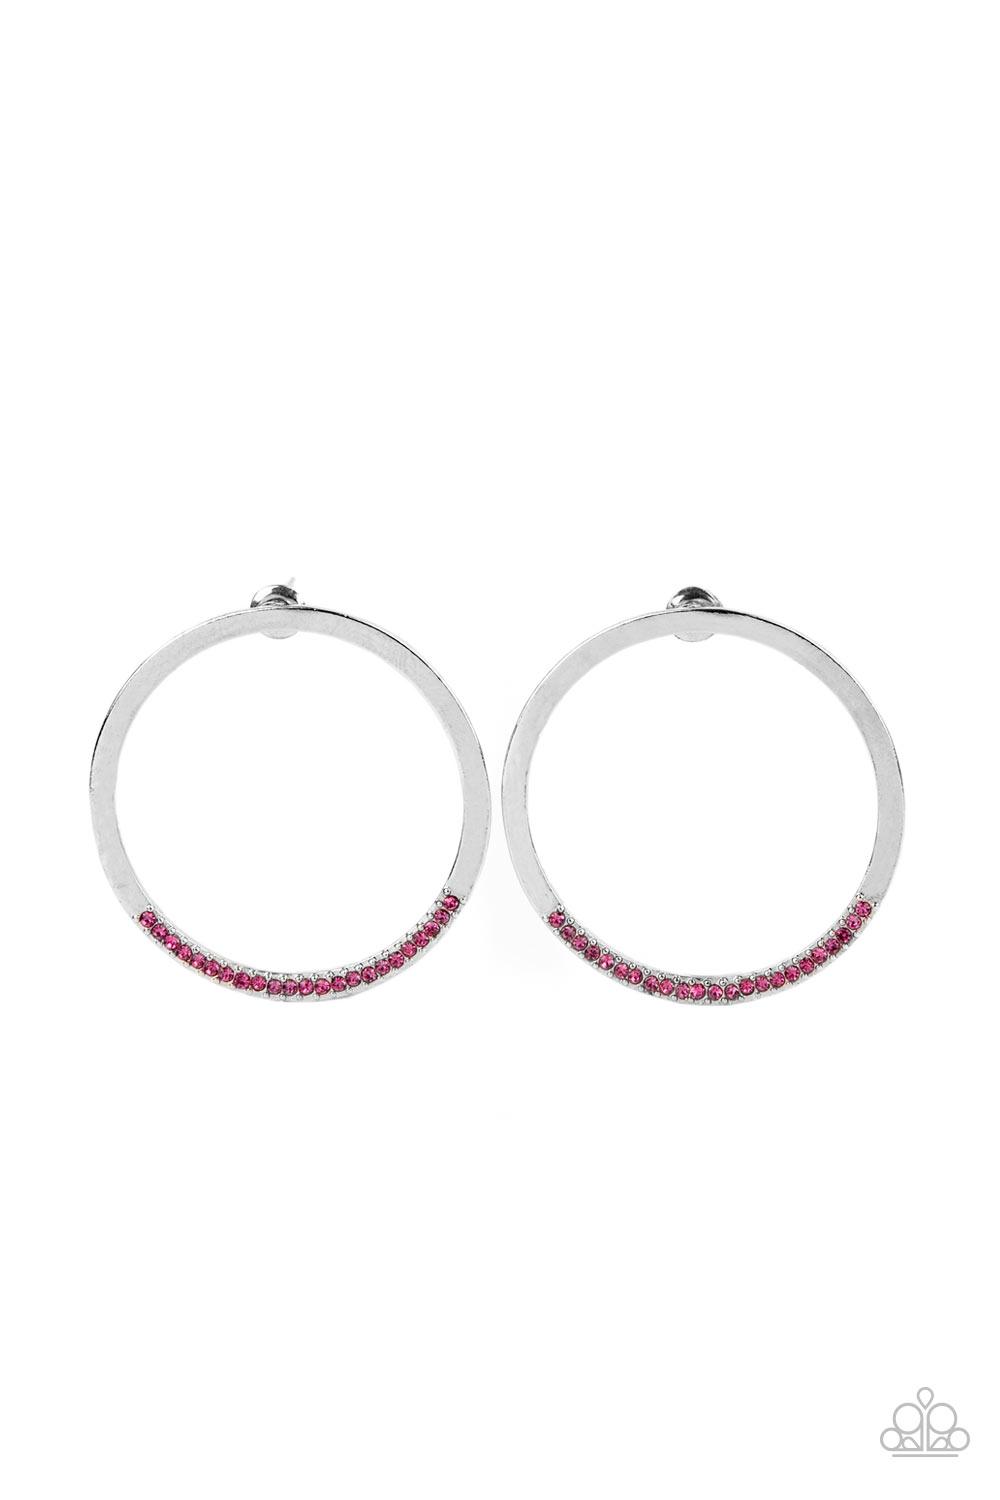 Paparazzi Accessories Spot On Opulence - Pink As if dipped in glitter, the bottom of a flat silver hoop is encrusted in dainty pink rhinestones for a classic shimmer. Earring attaches to a standard post fitting. Sold as one pair of post earrings. Jewelry